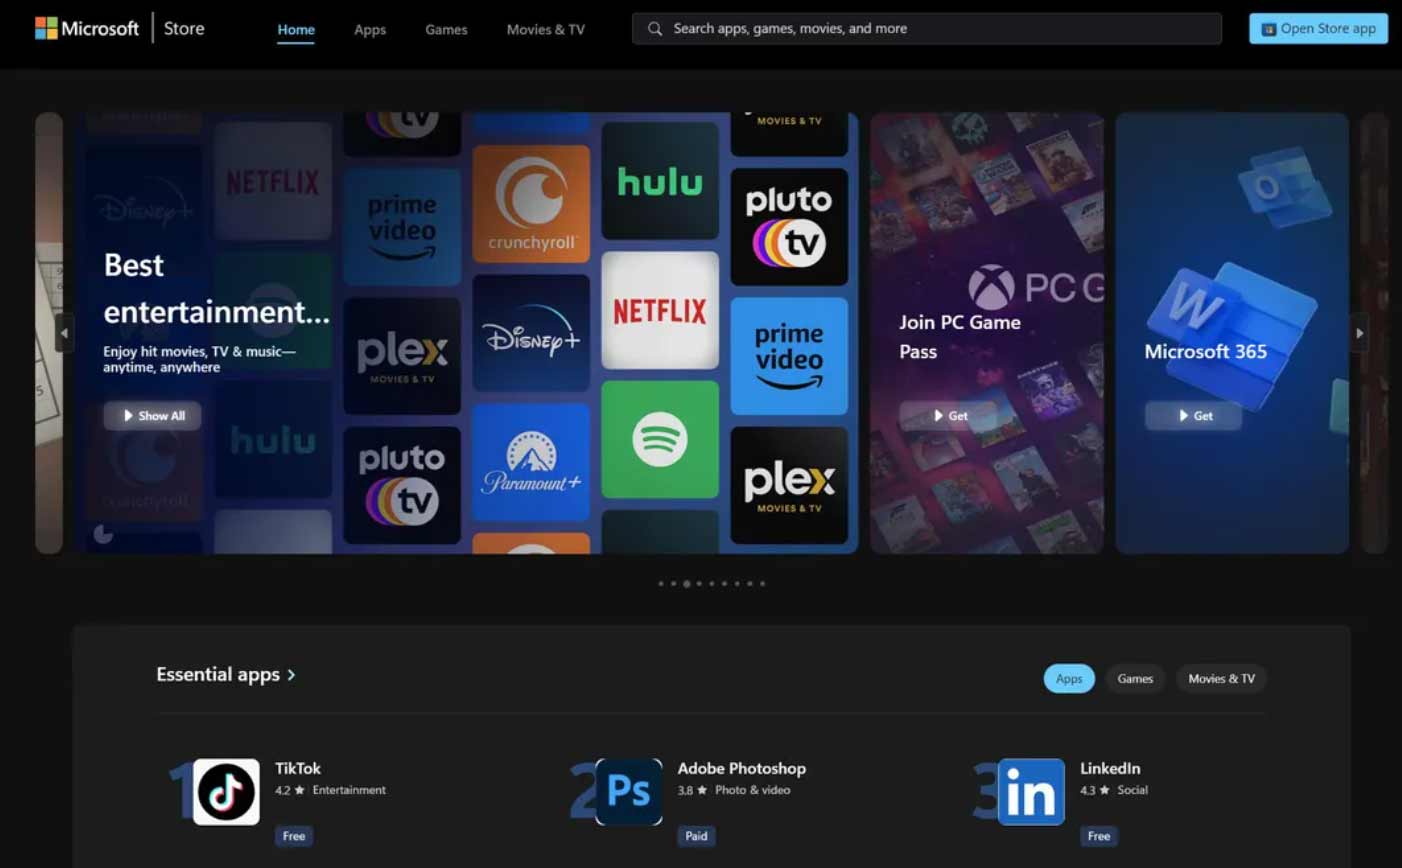 Microsoft Launches New Web App Store for Windows